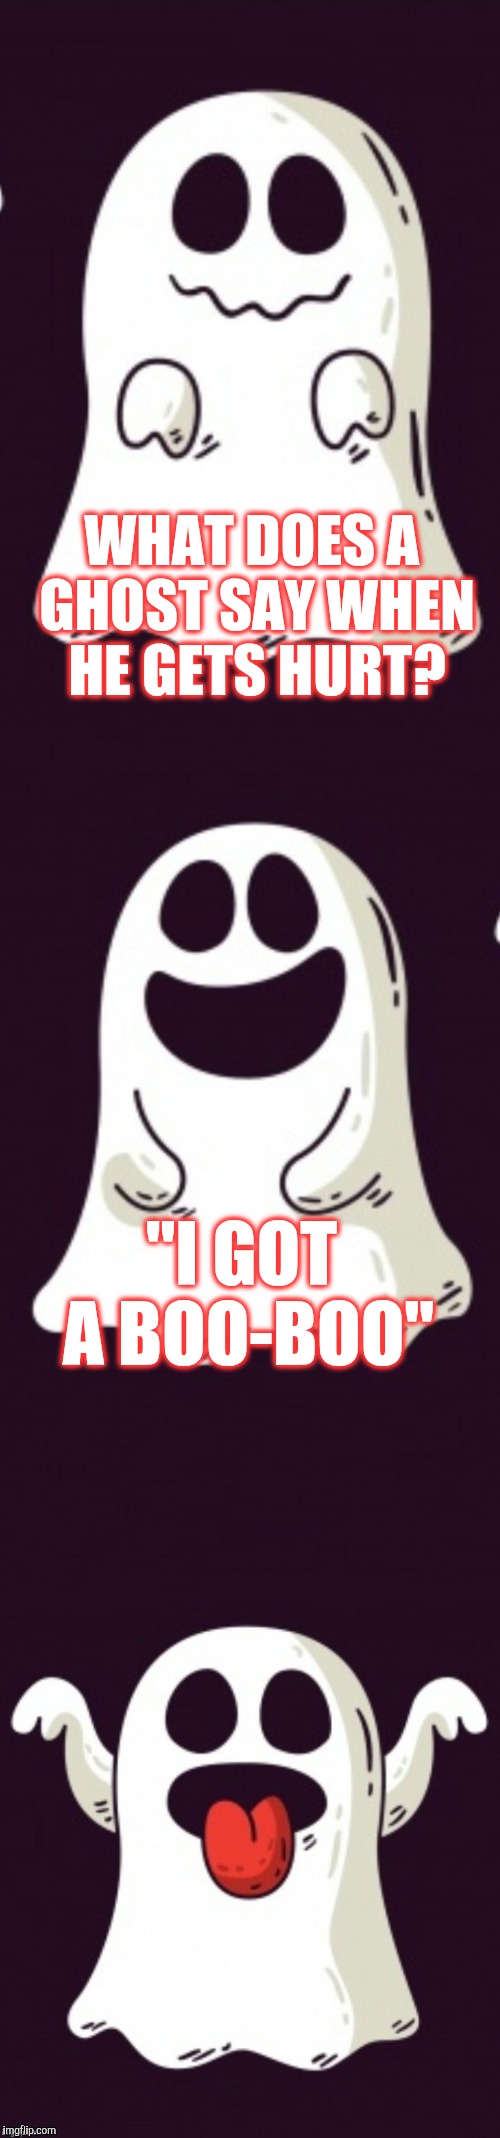 Ghost Week, Jan. 21-27, A LaurynFlint Event! | WHAT DOES A GHOST SAY WHEN HE GETS HURT? "I GOT A BOO-BOO" | image tagged in ghost joke template,jbmemegeek,ghost week,ghosts,bad puns | made w/ Imgflip meme maker